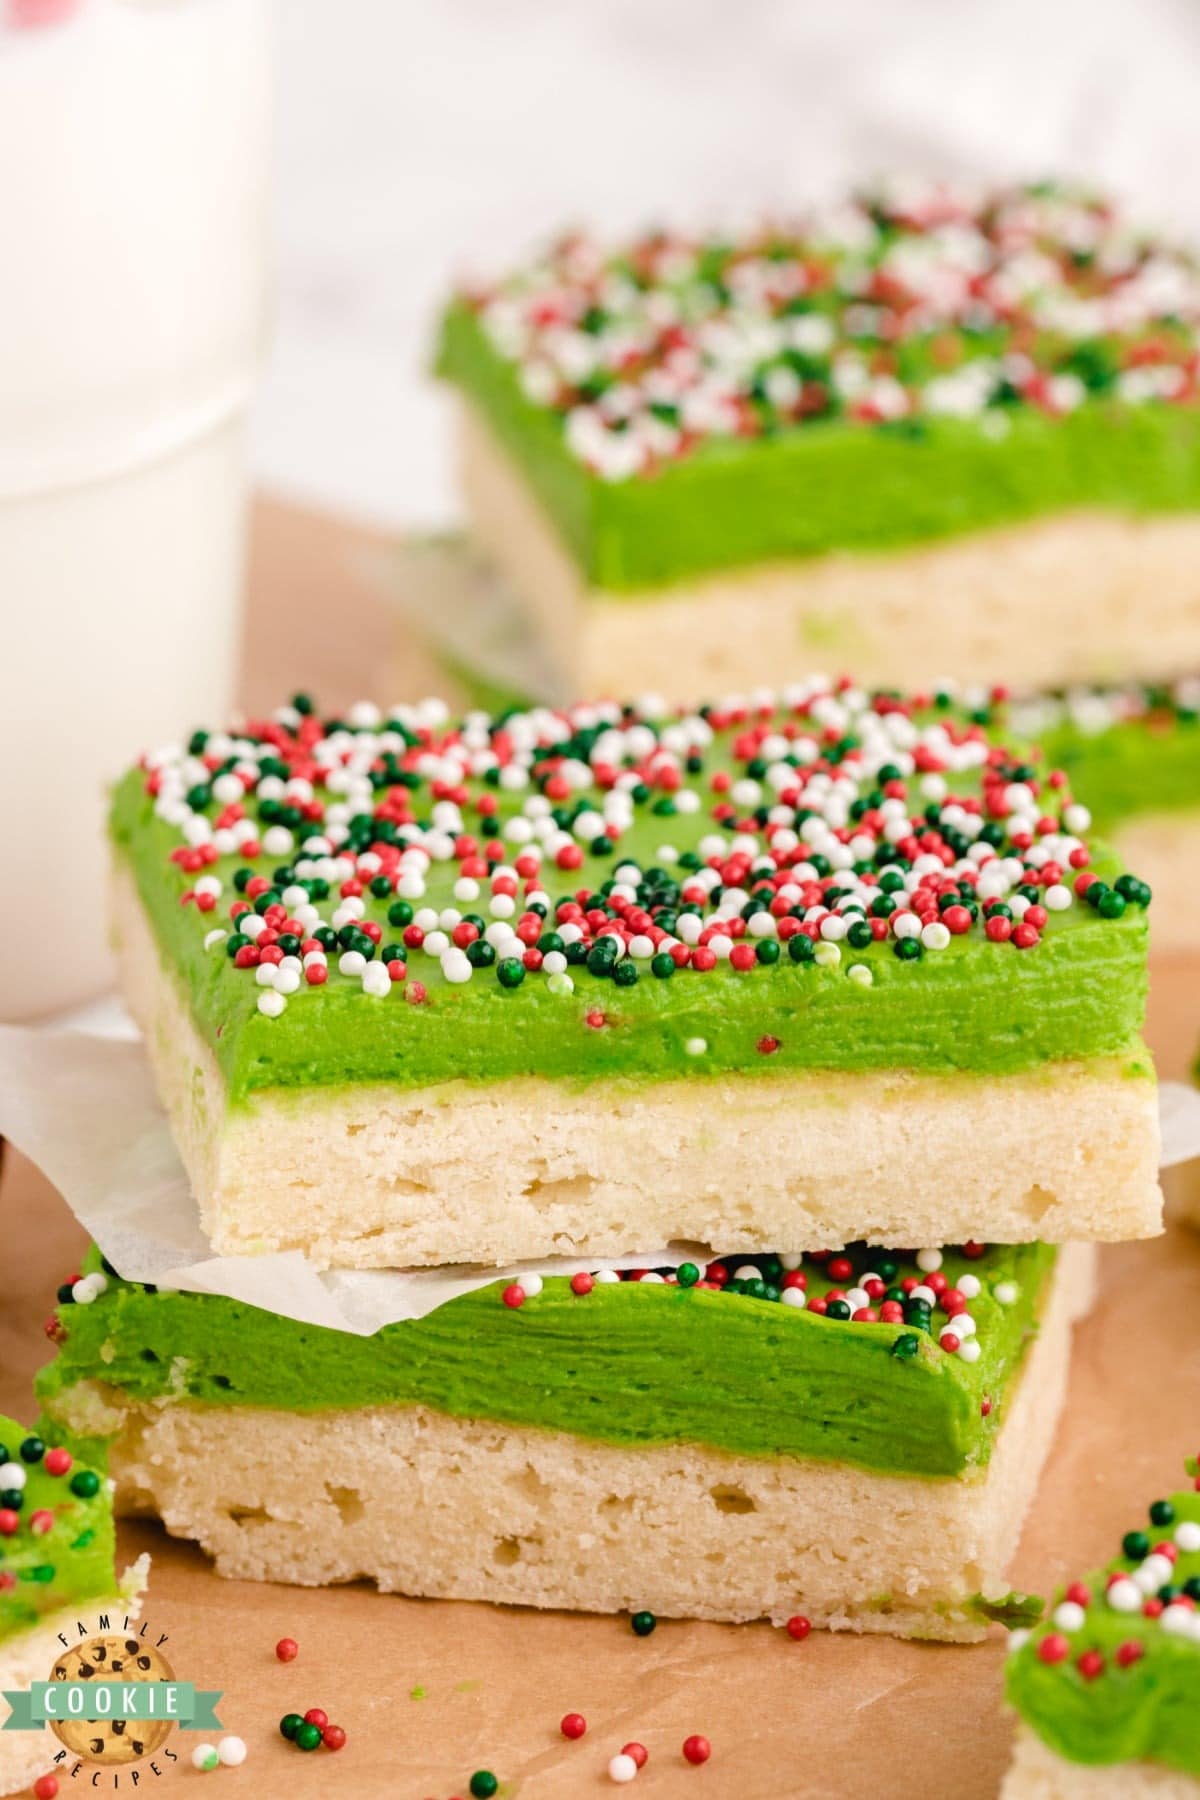 Sugar cookie bars with green frosting and sprinkles.